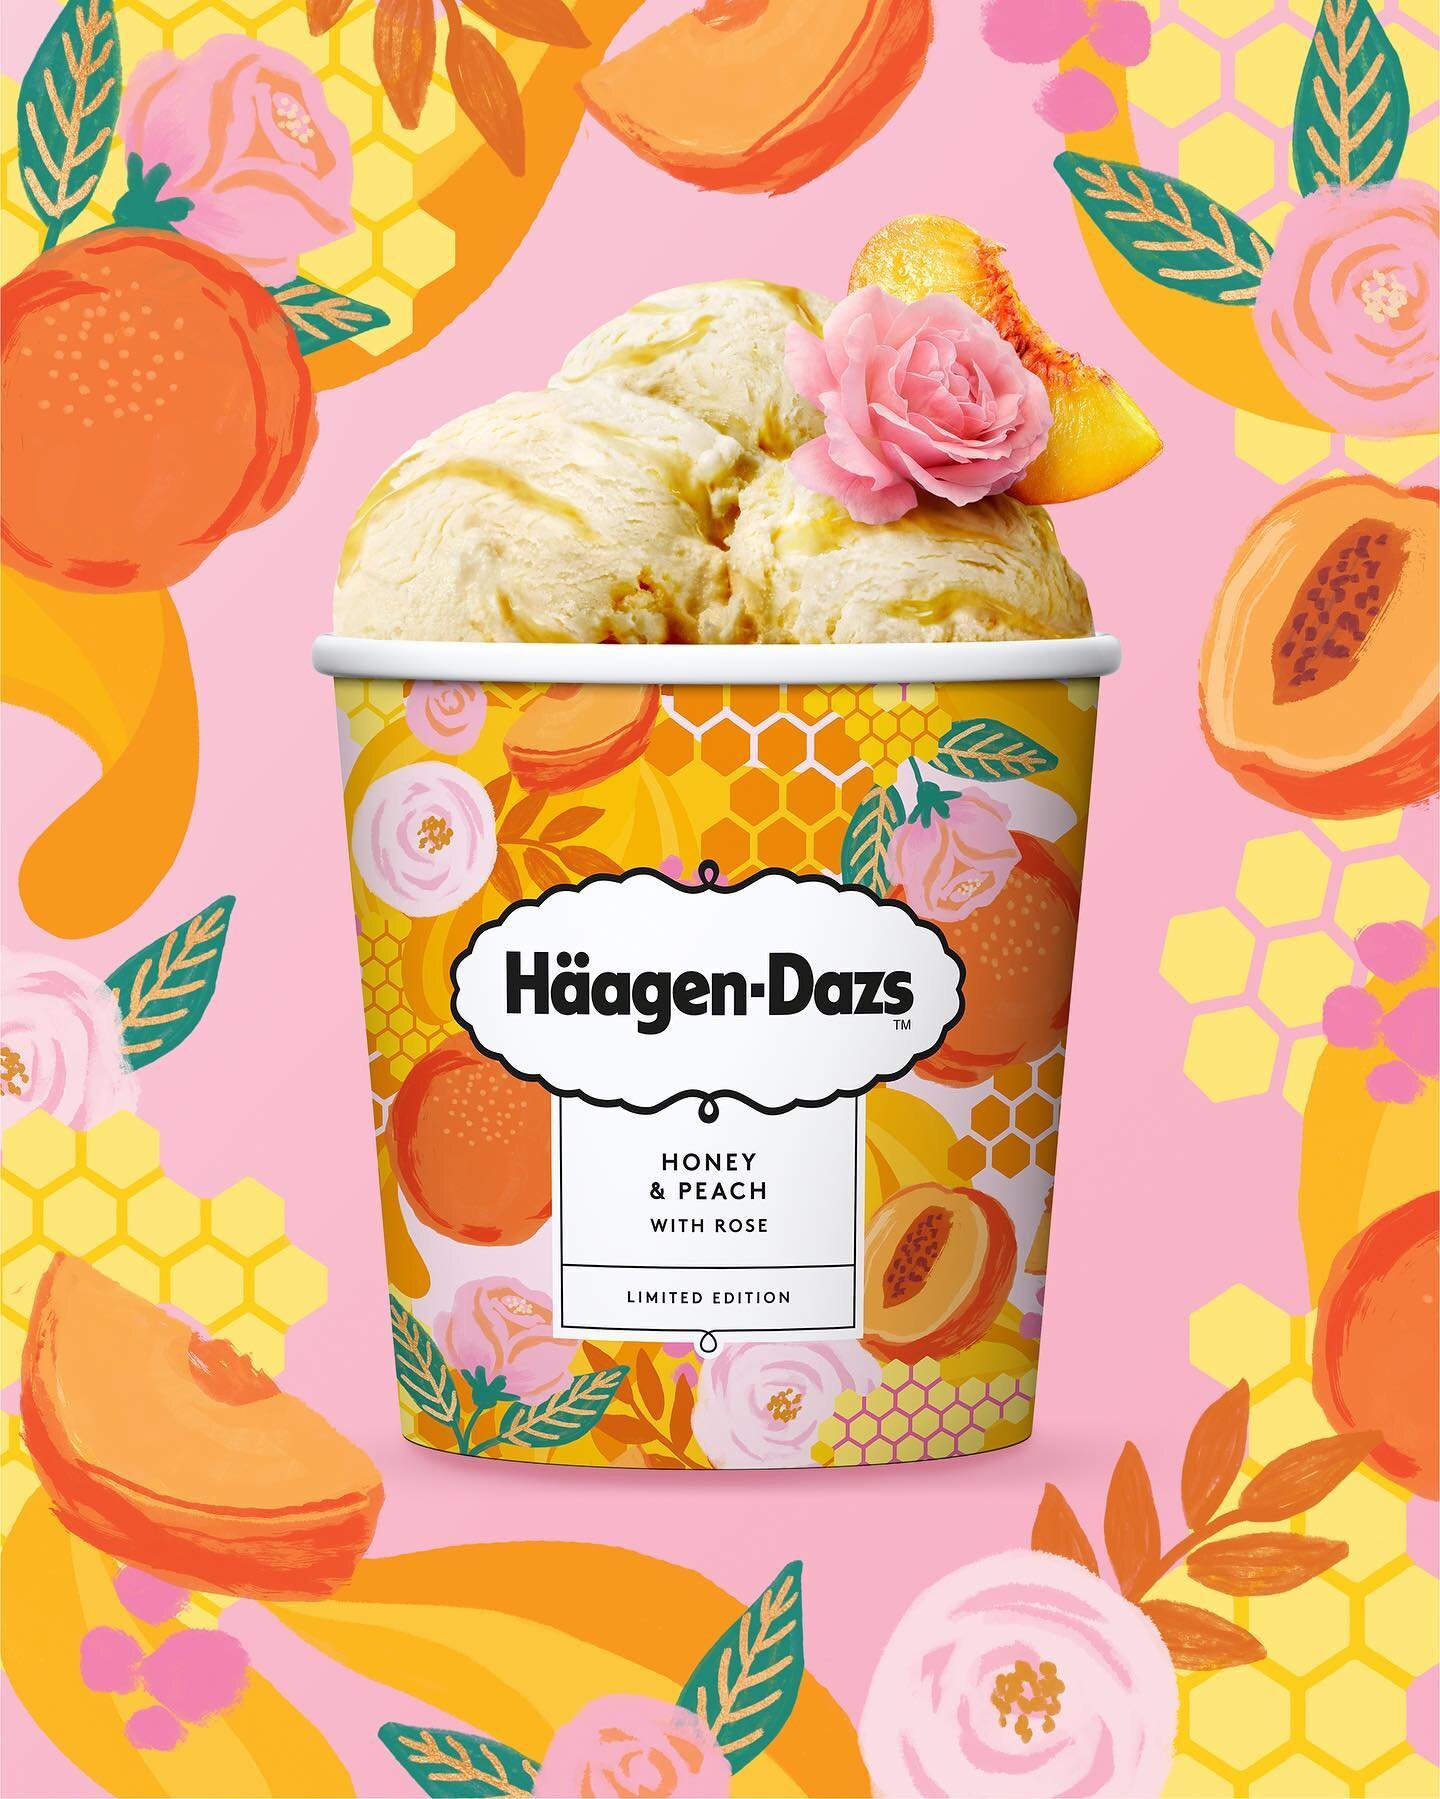 Jess Phoenix X H&auml;agen-Dazs‼️ I'm excited to finally share the collaboration I did with H&auml;agen-Dazs to create designs for 2 of their Limited Edition flavors: Honey Peach Rose and Honey Grapefruit Hibiscus. This was one of the most complicate